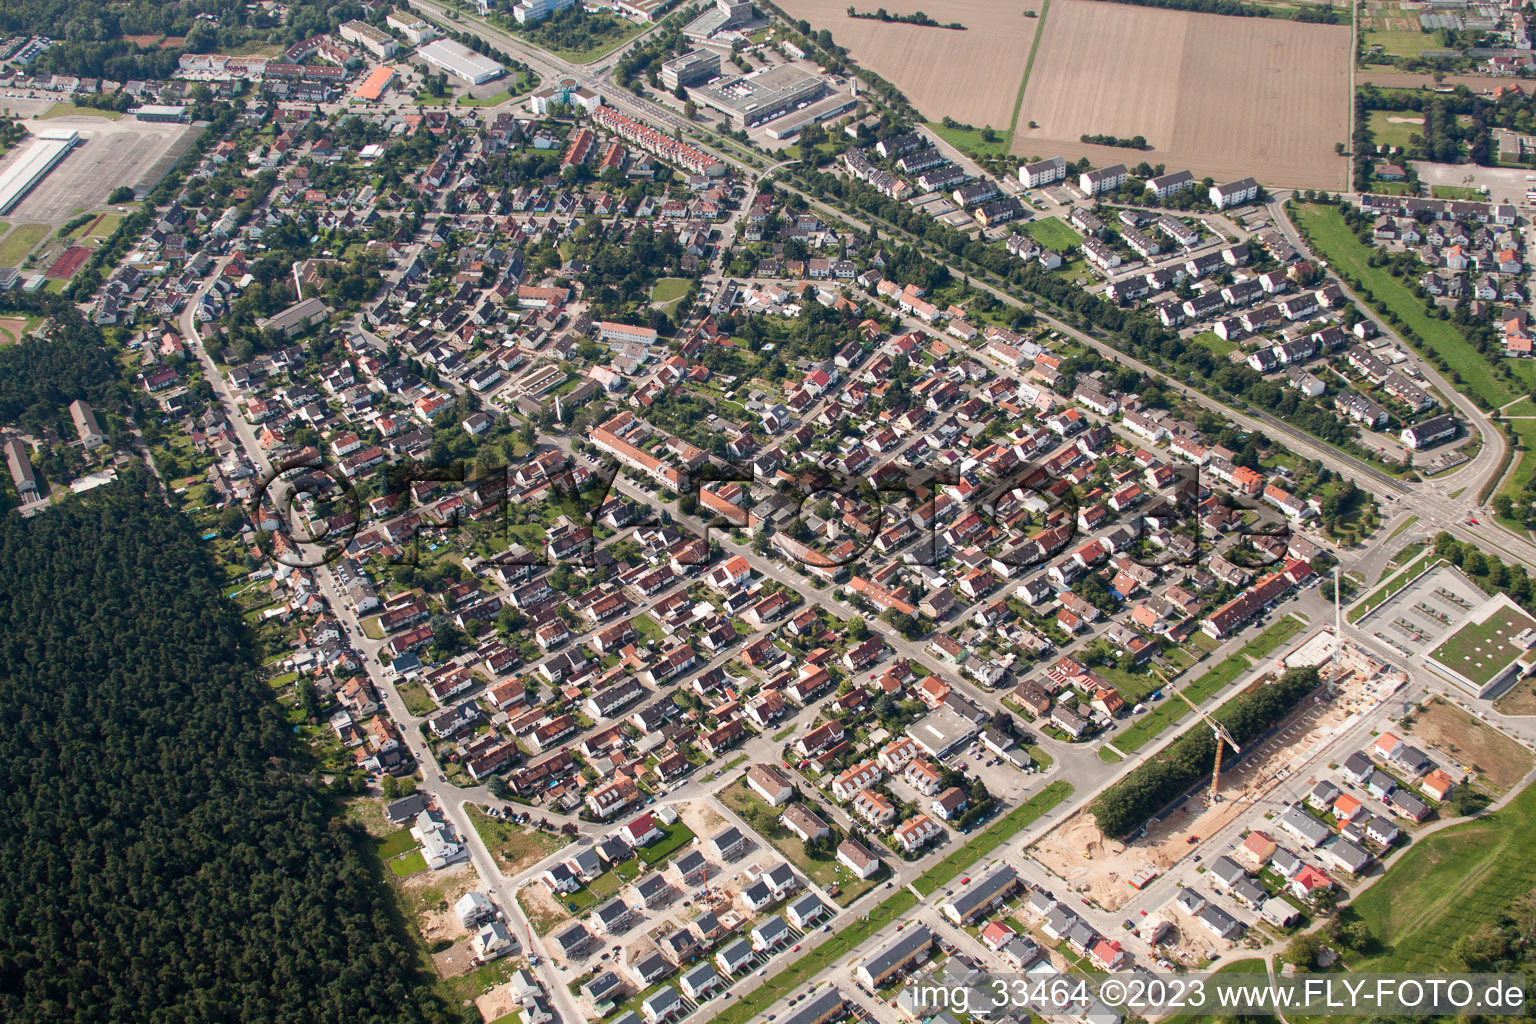 Kirchfeld settlement from the north in the district Neureut in Karlsruhe in the state Baden-Wuerttemberg, Germany